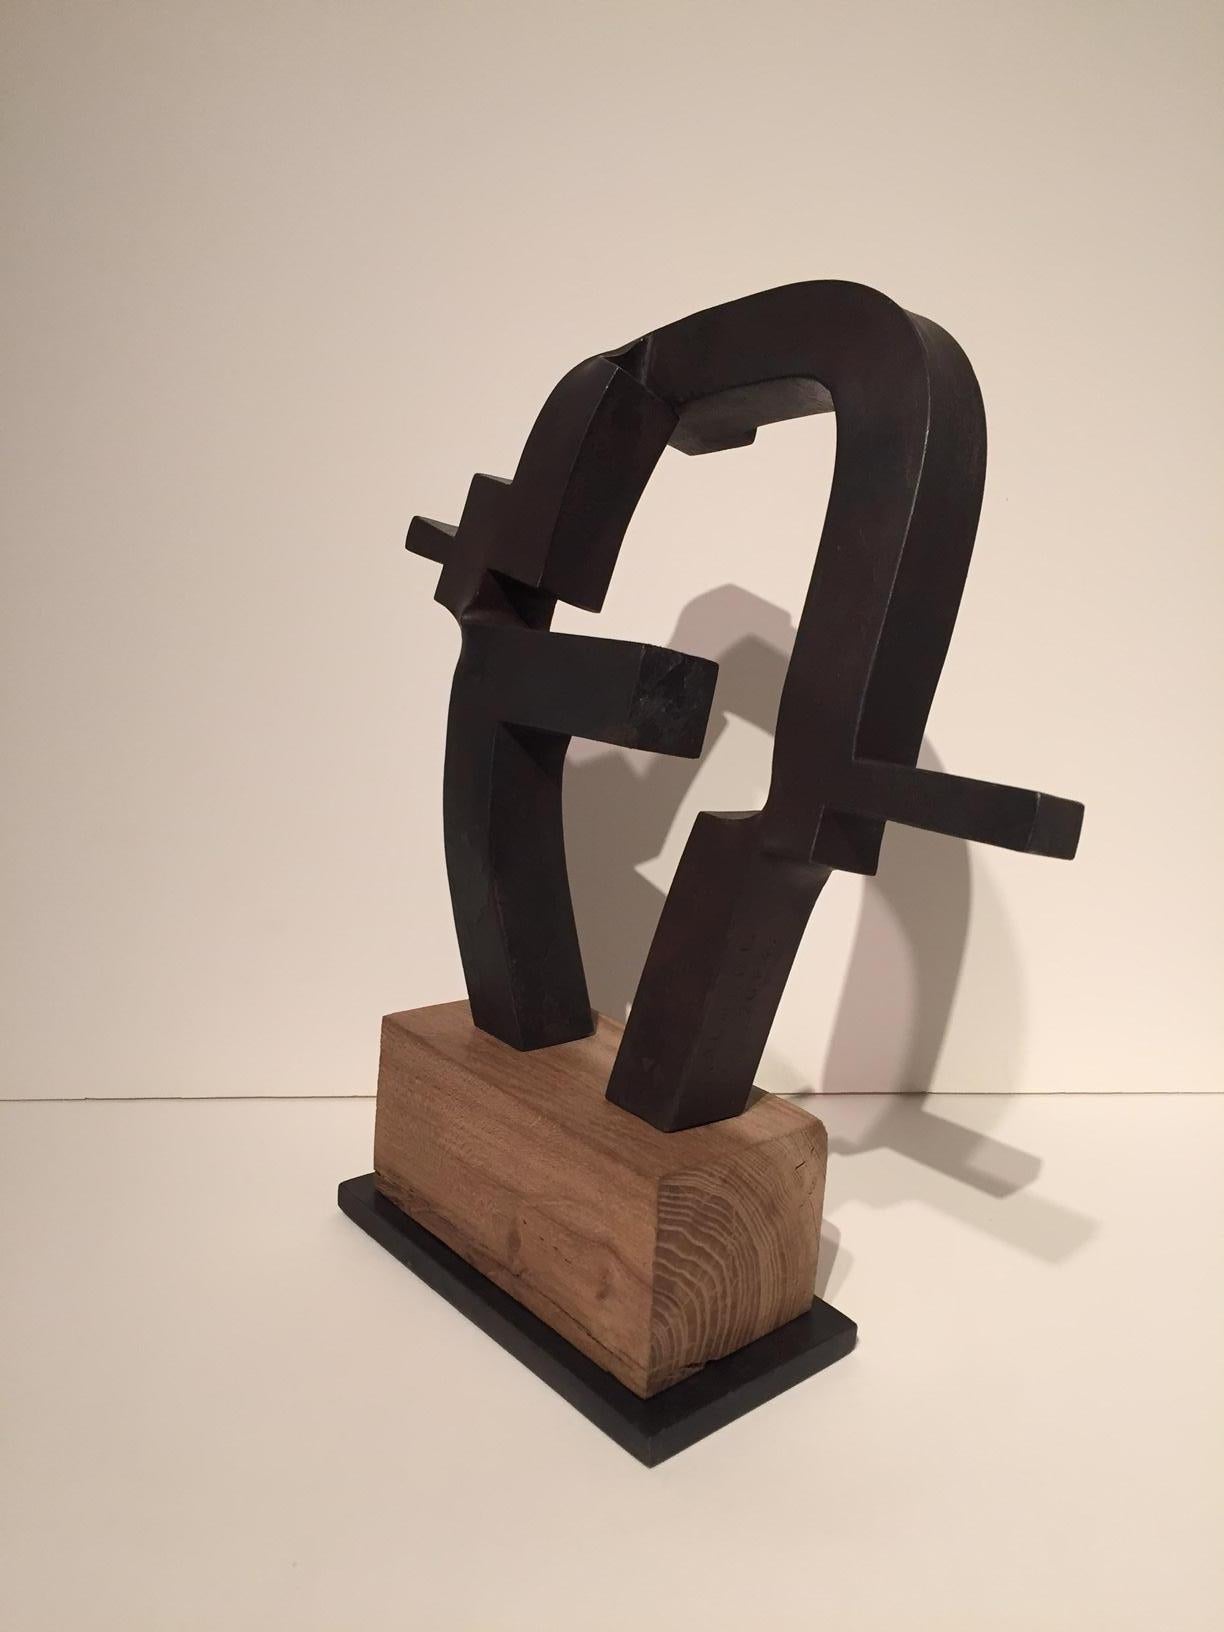 This is a 3 dimensional sculpture by Spanish abstract expressionist, Carlos Albert in dark gray forged steel on a natural light poplar wood base. 

Carlos Albert is a graduate of the School of Fine Arts at the Universidad de Complutense in Madrid,